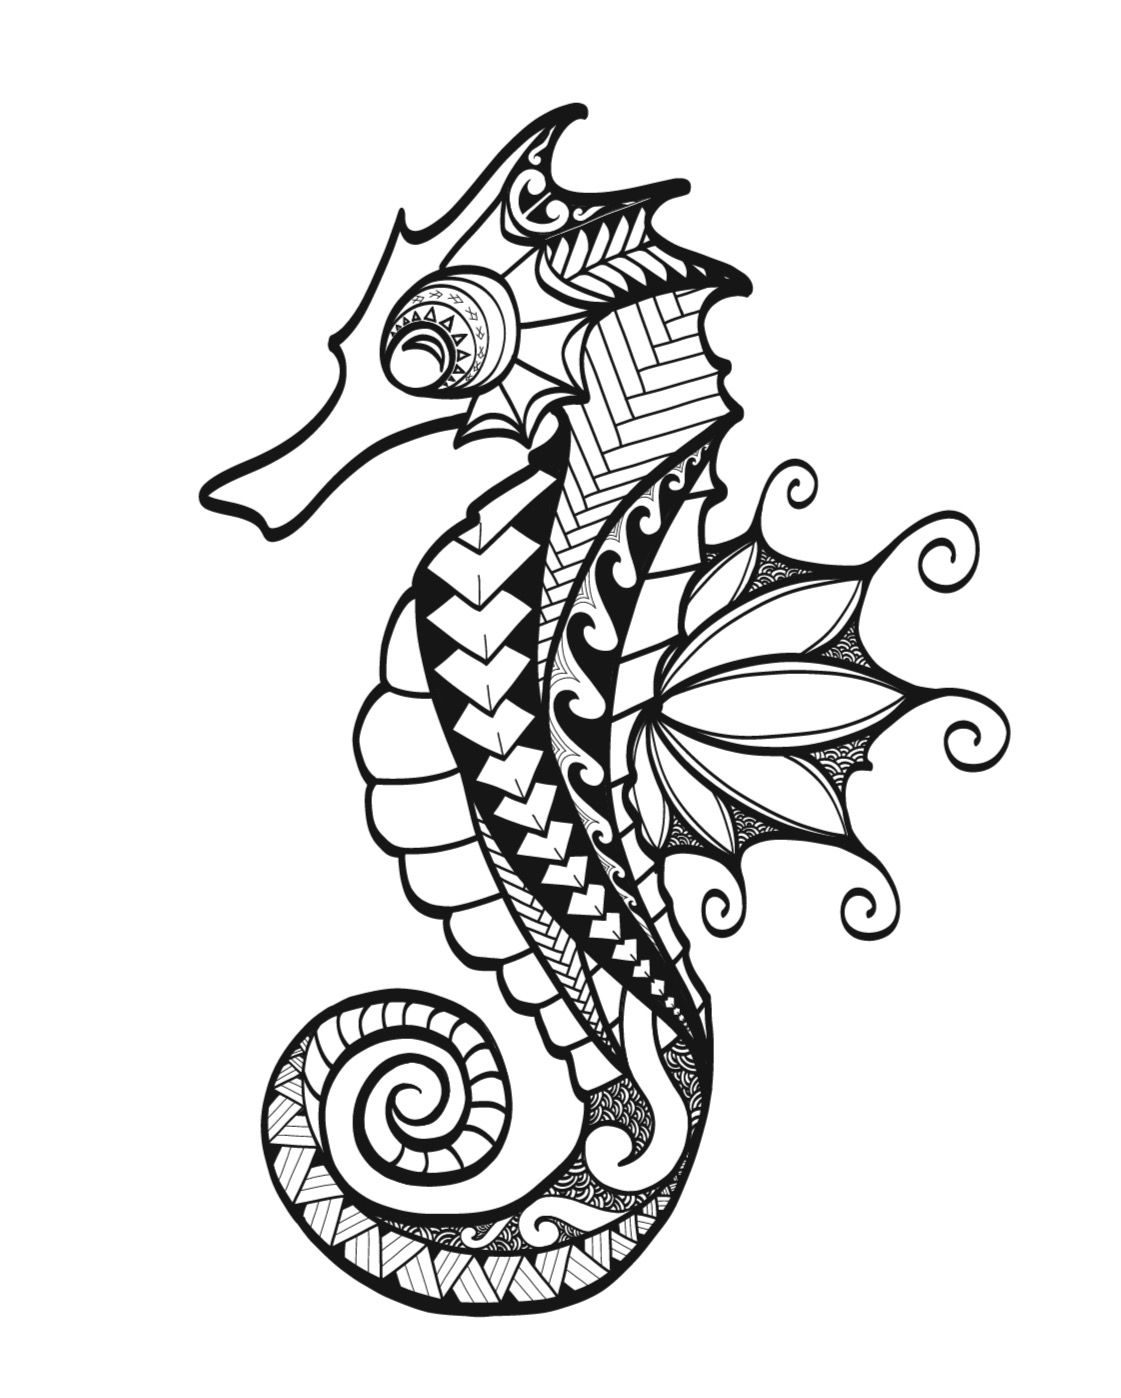 Creative Seahorse Drawing Sketch for Kids